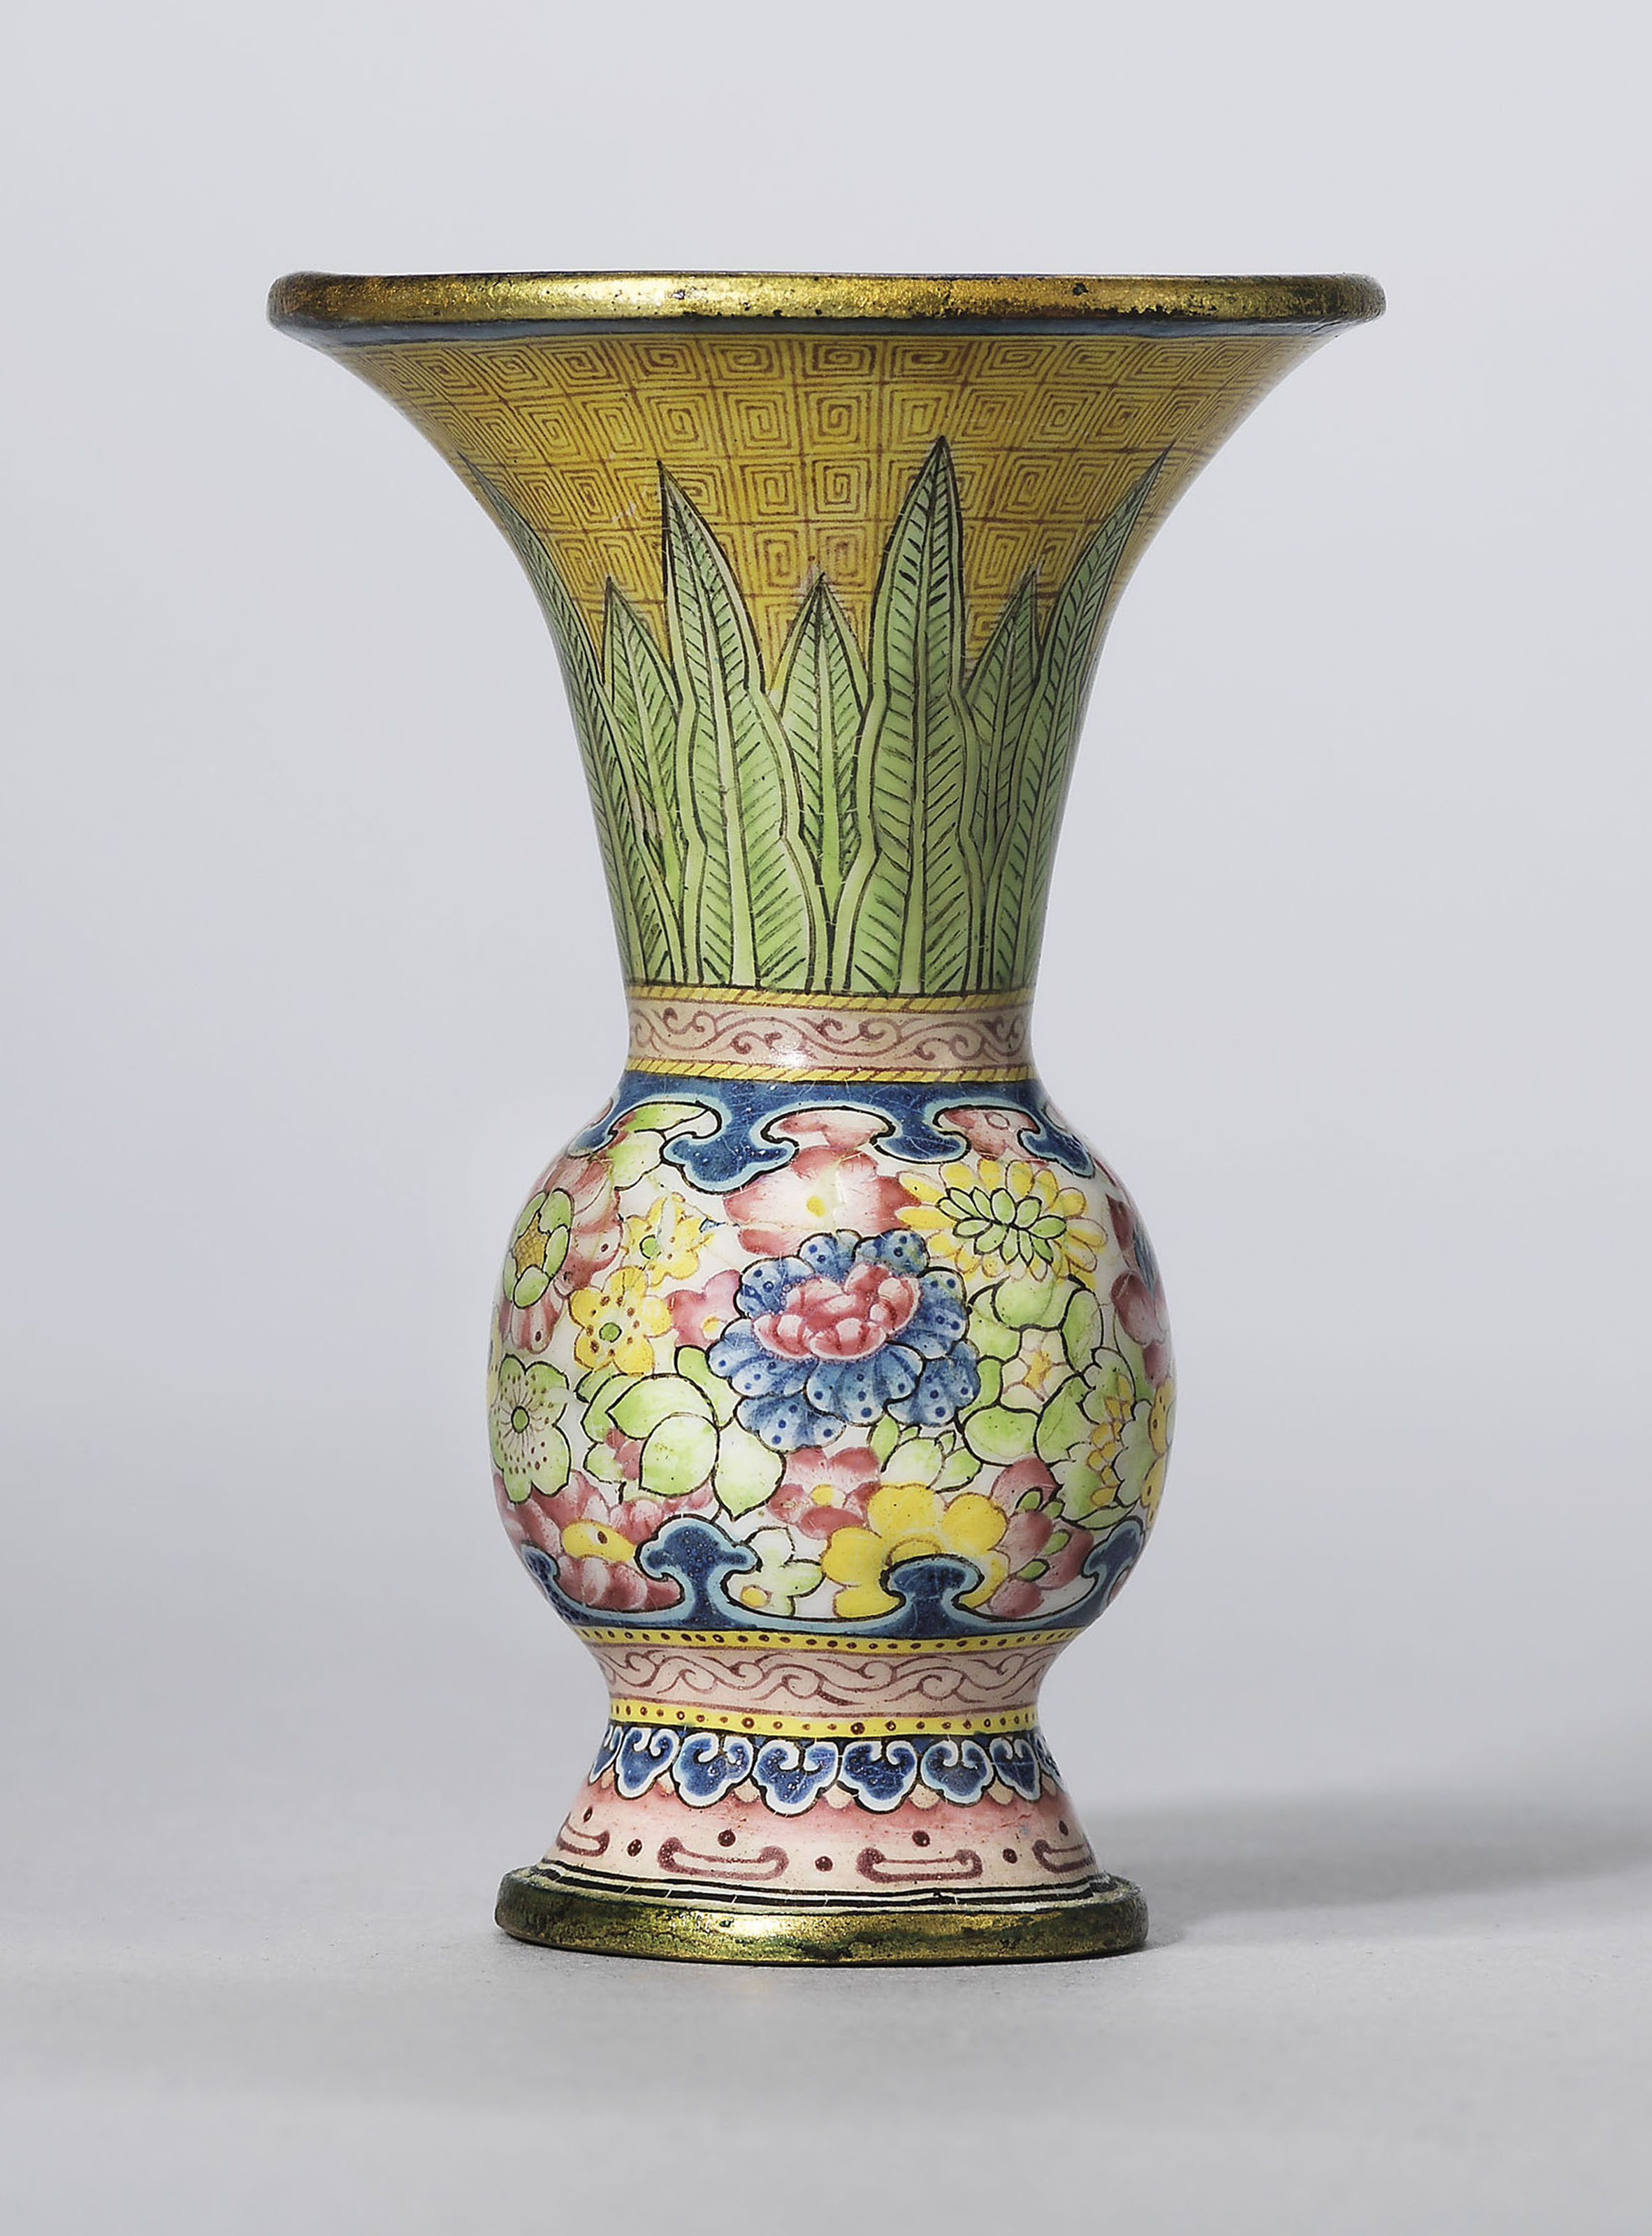 21 attractive Tall Thin Gold Vase 2024 free download tall thin gold vase of a guide to the symbolism of flowers on chinese ceramics christies inside a rare painted enamel gu shaped miniature vase qianlong four character mark in